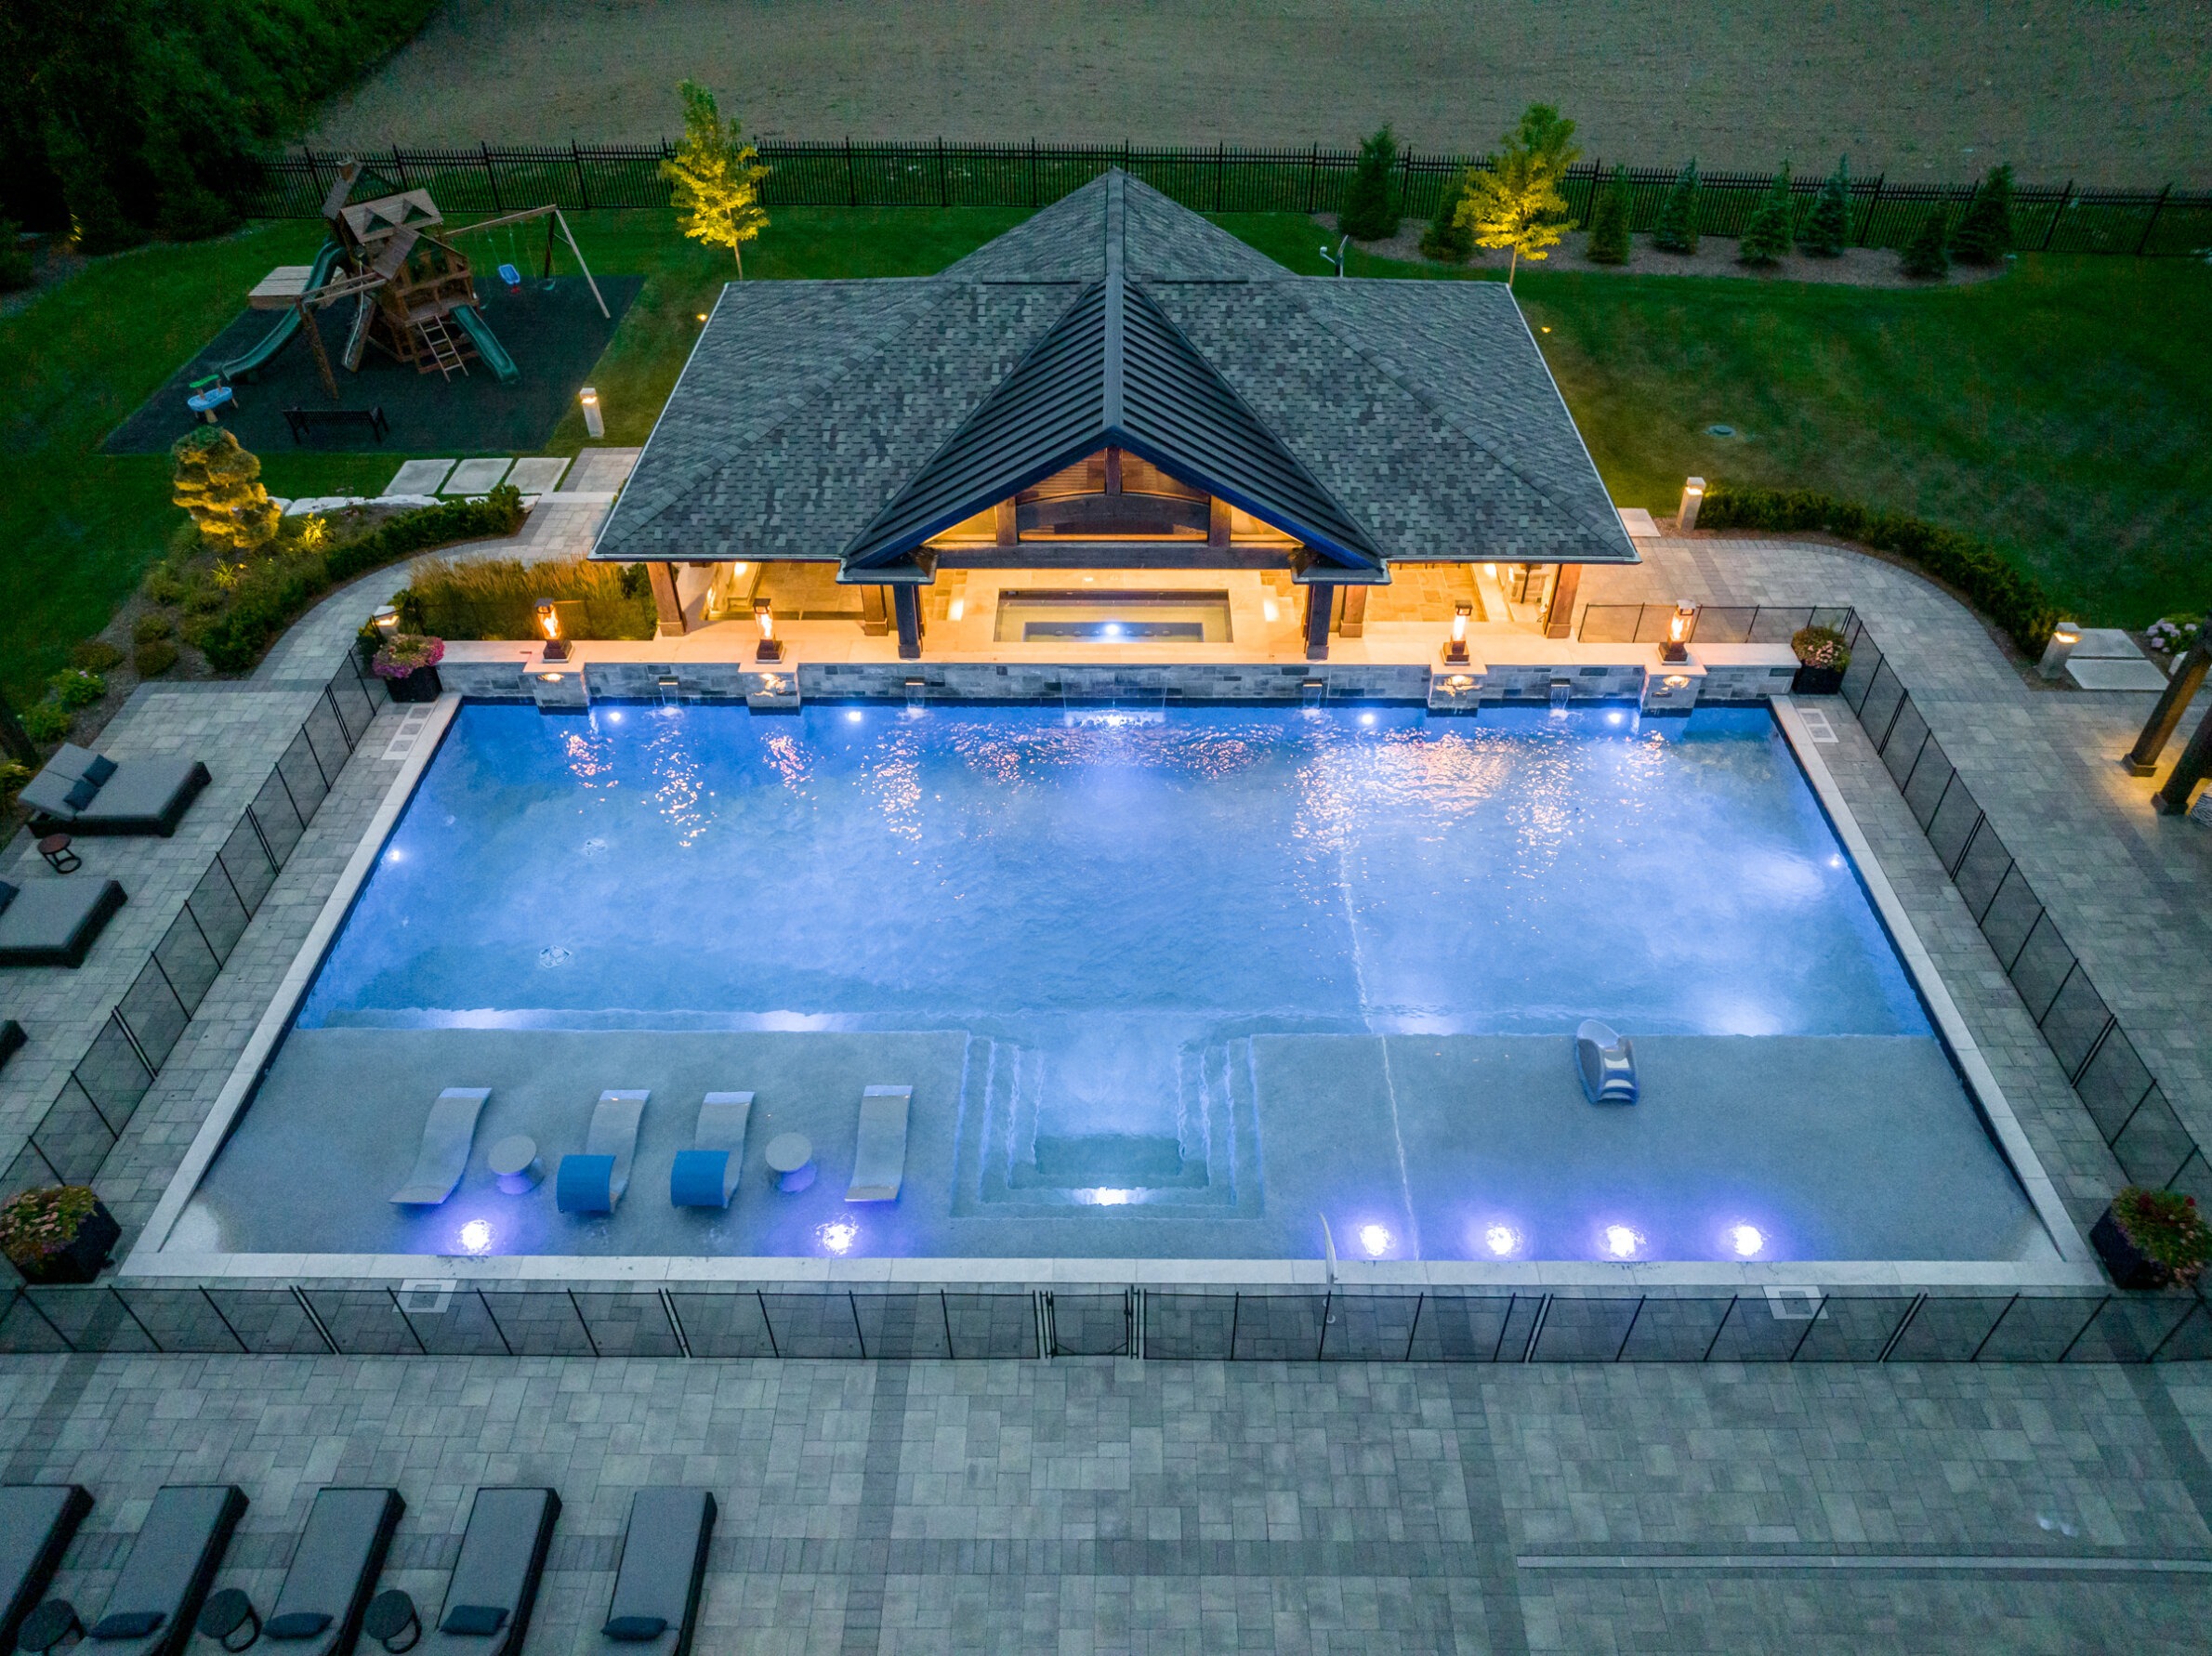 Aerial view at dusk of a luxurious backyard with a large swimming pool, lounge chairs, landscaped garden, and a children